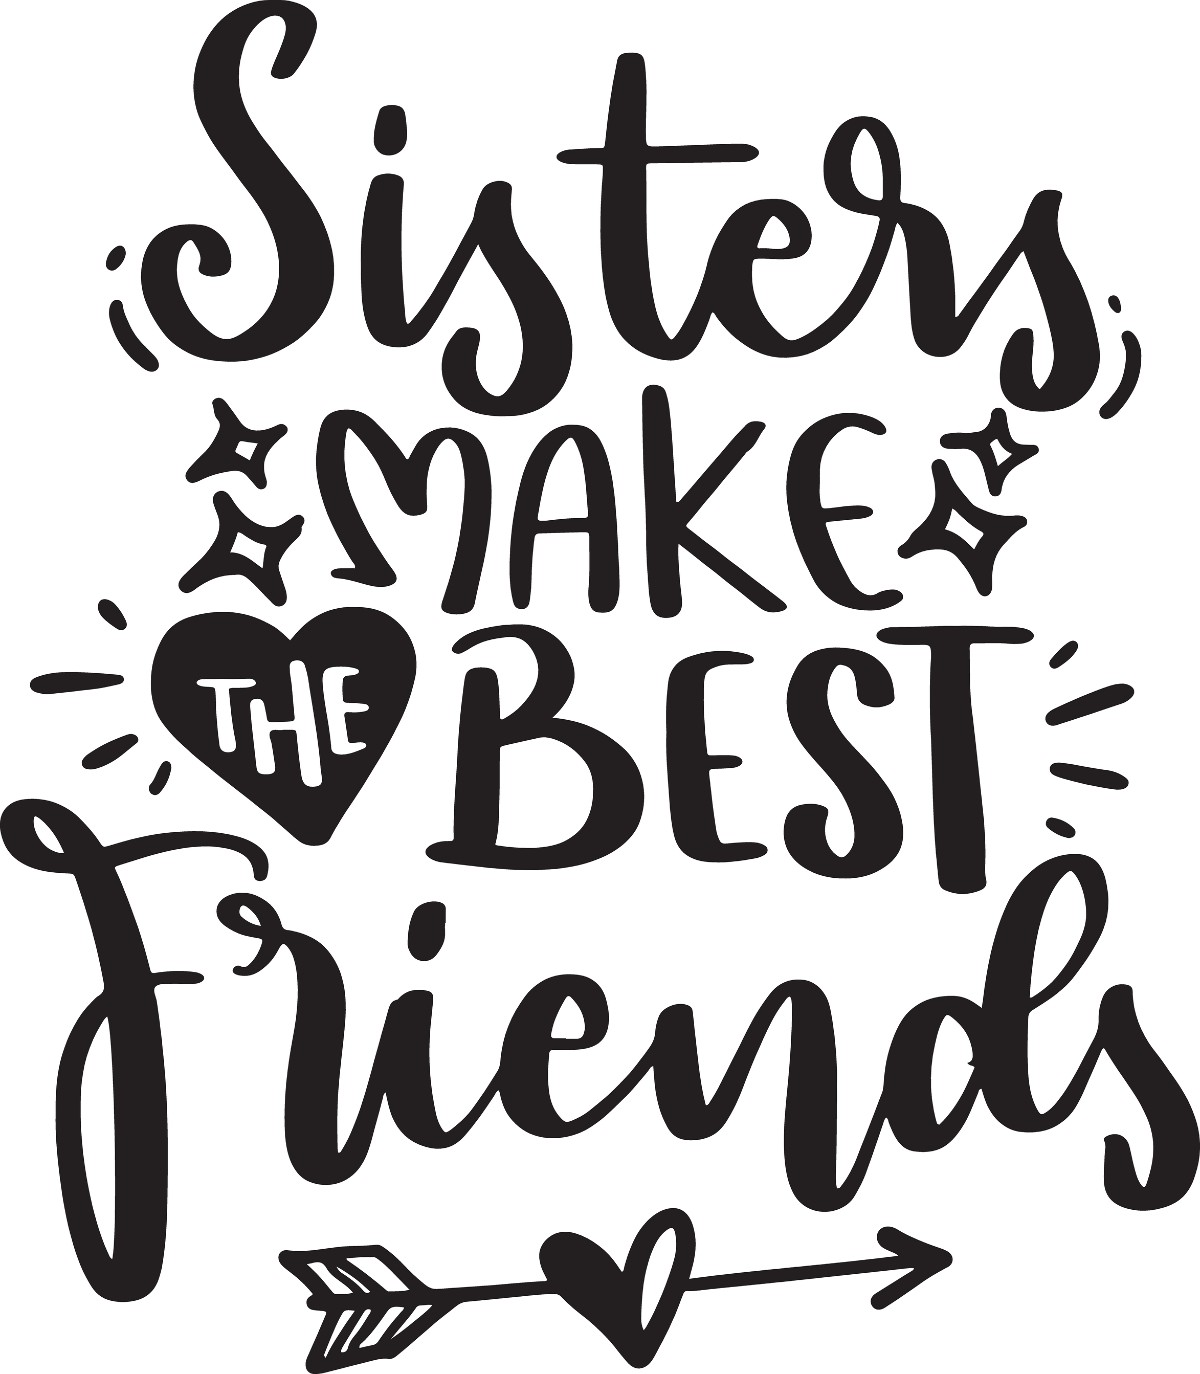 Happy Sisters Day 2021: Image, Wishes, Quotes, Messages and WhatsApp Greetings to Share with Your Sister Dear